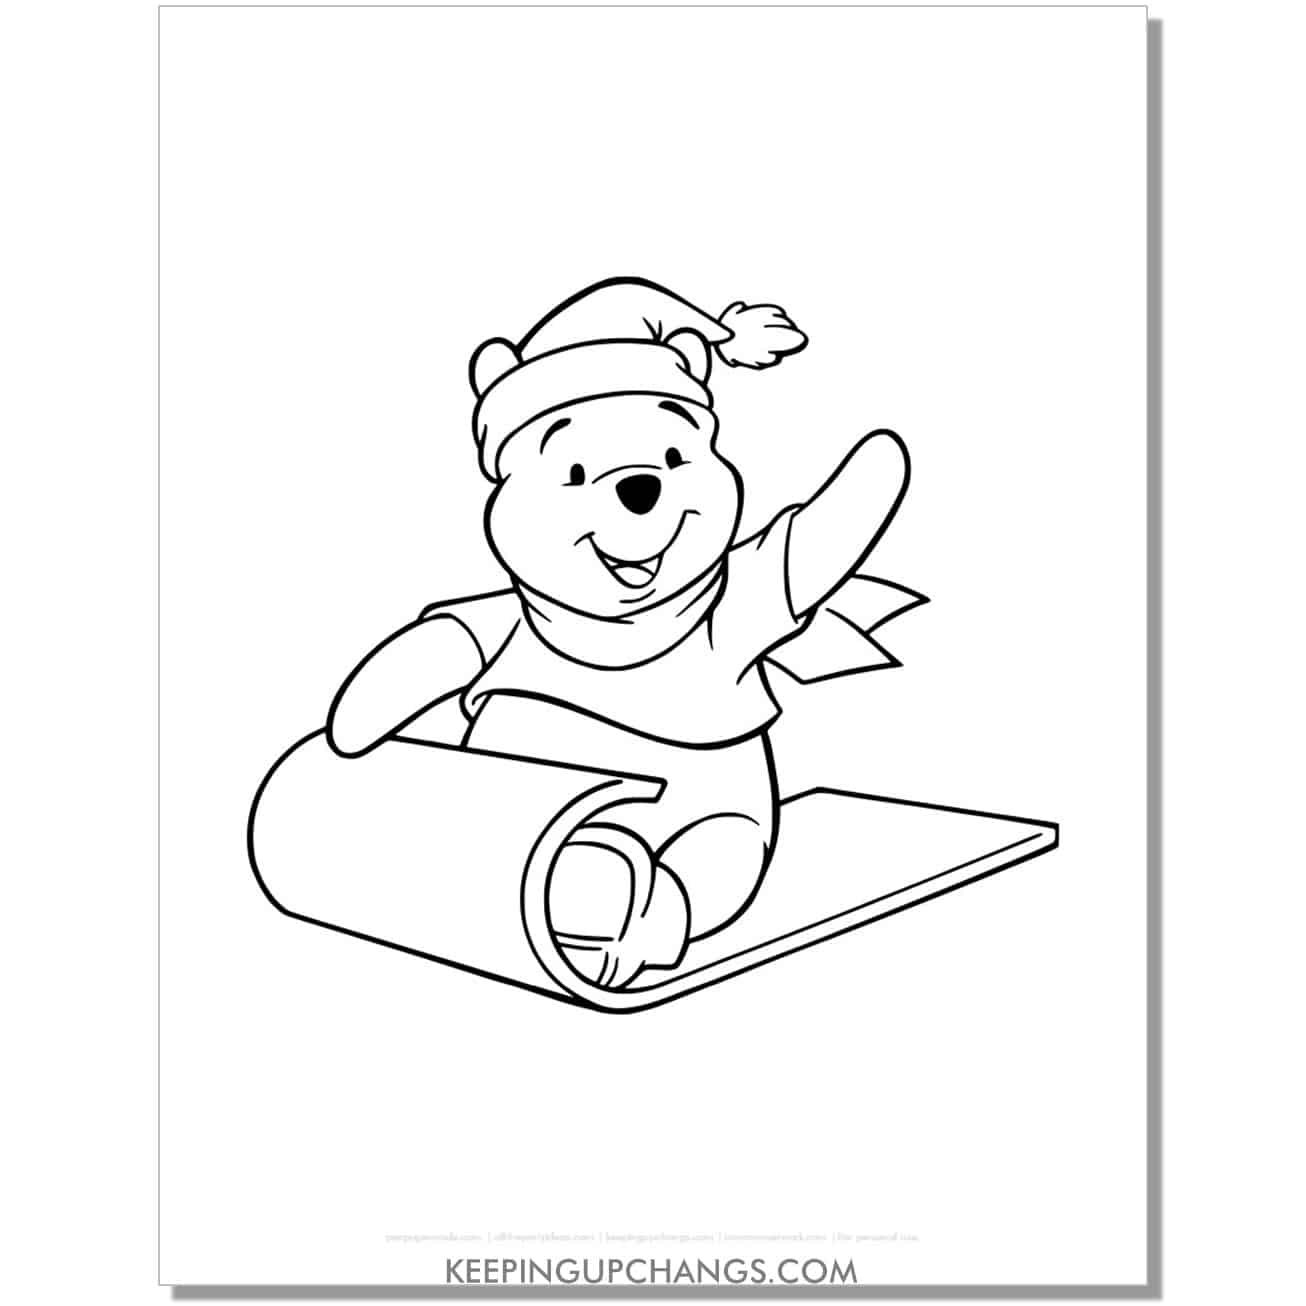 winnie the pooh in sled coloring page, sheet.